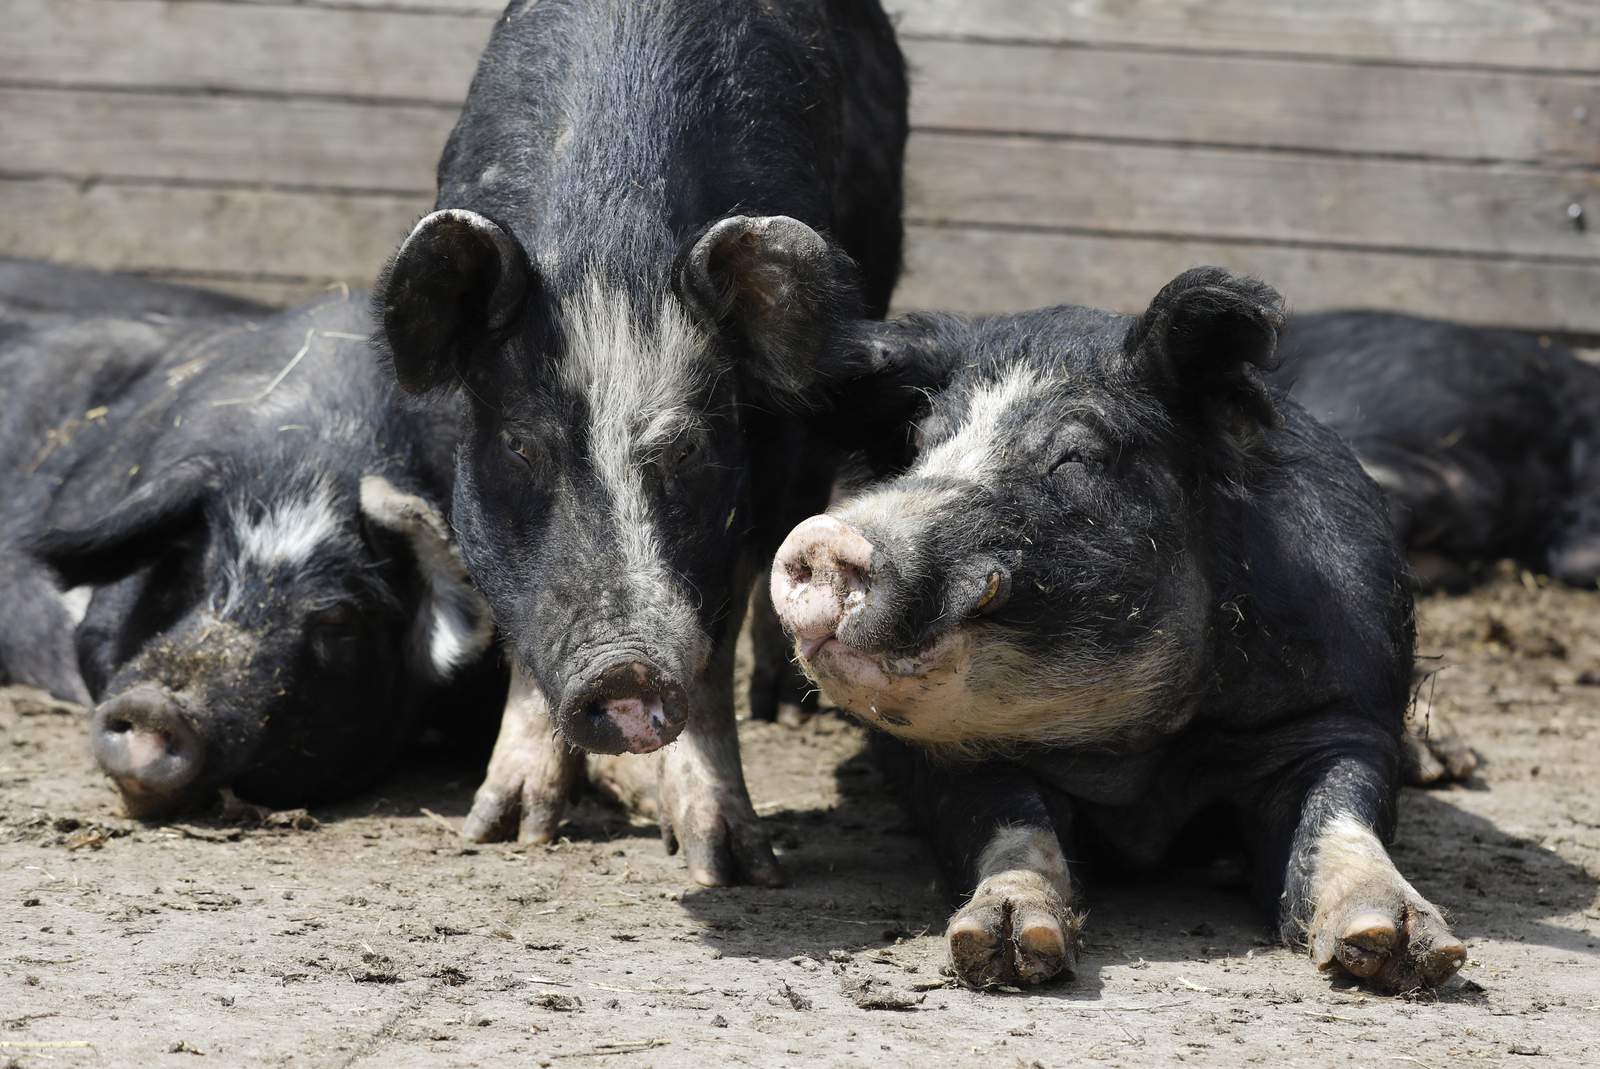 Group Of Pigs Kill 4 Years Old In Rangareddy District Of Telangana